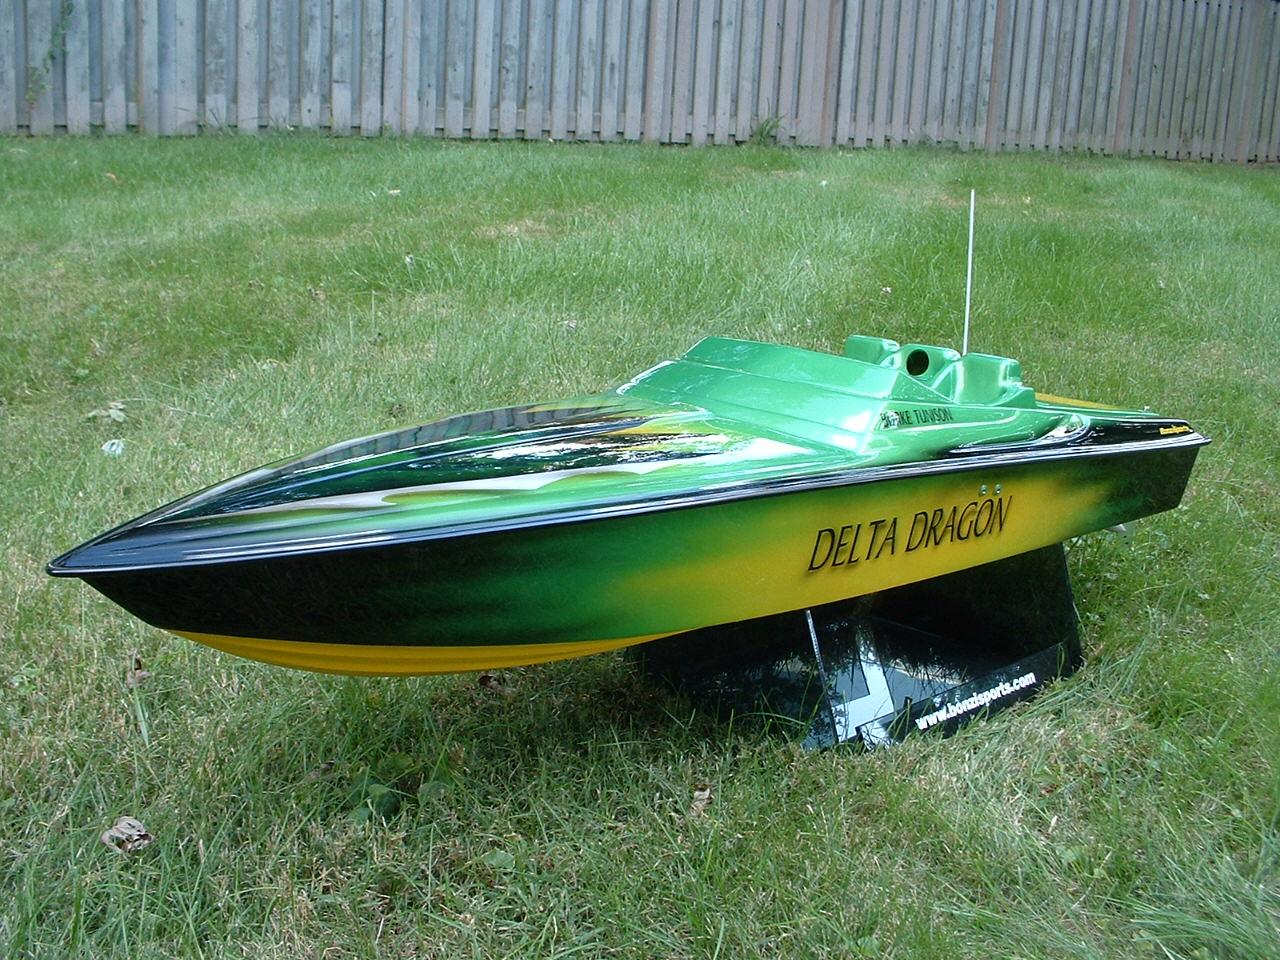 Rc Boat Apache: Easy Tips for Purchasing an RC Boat Apache